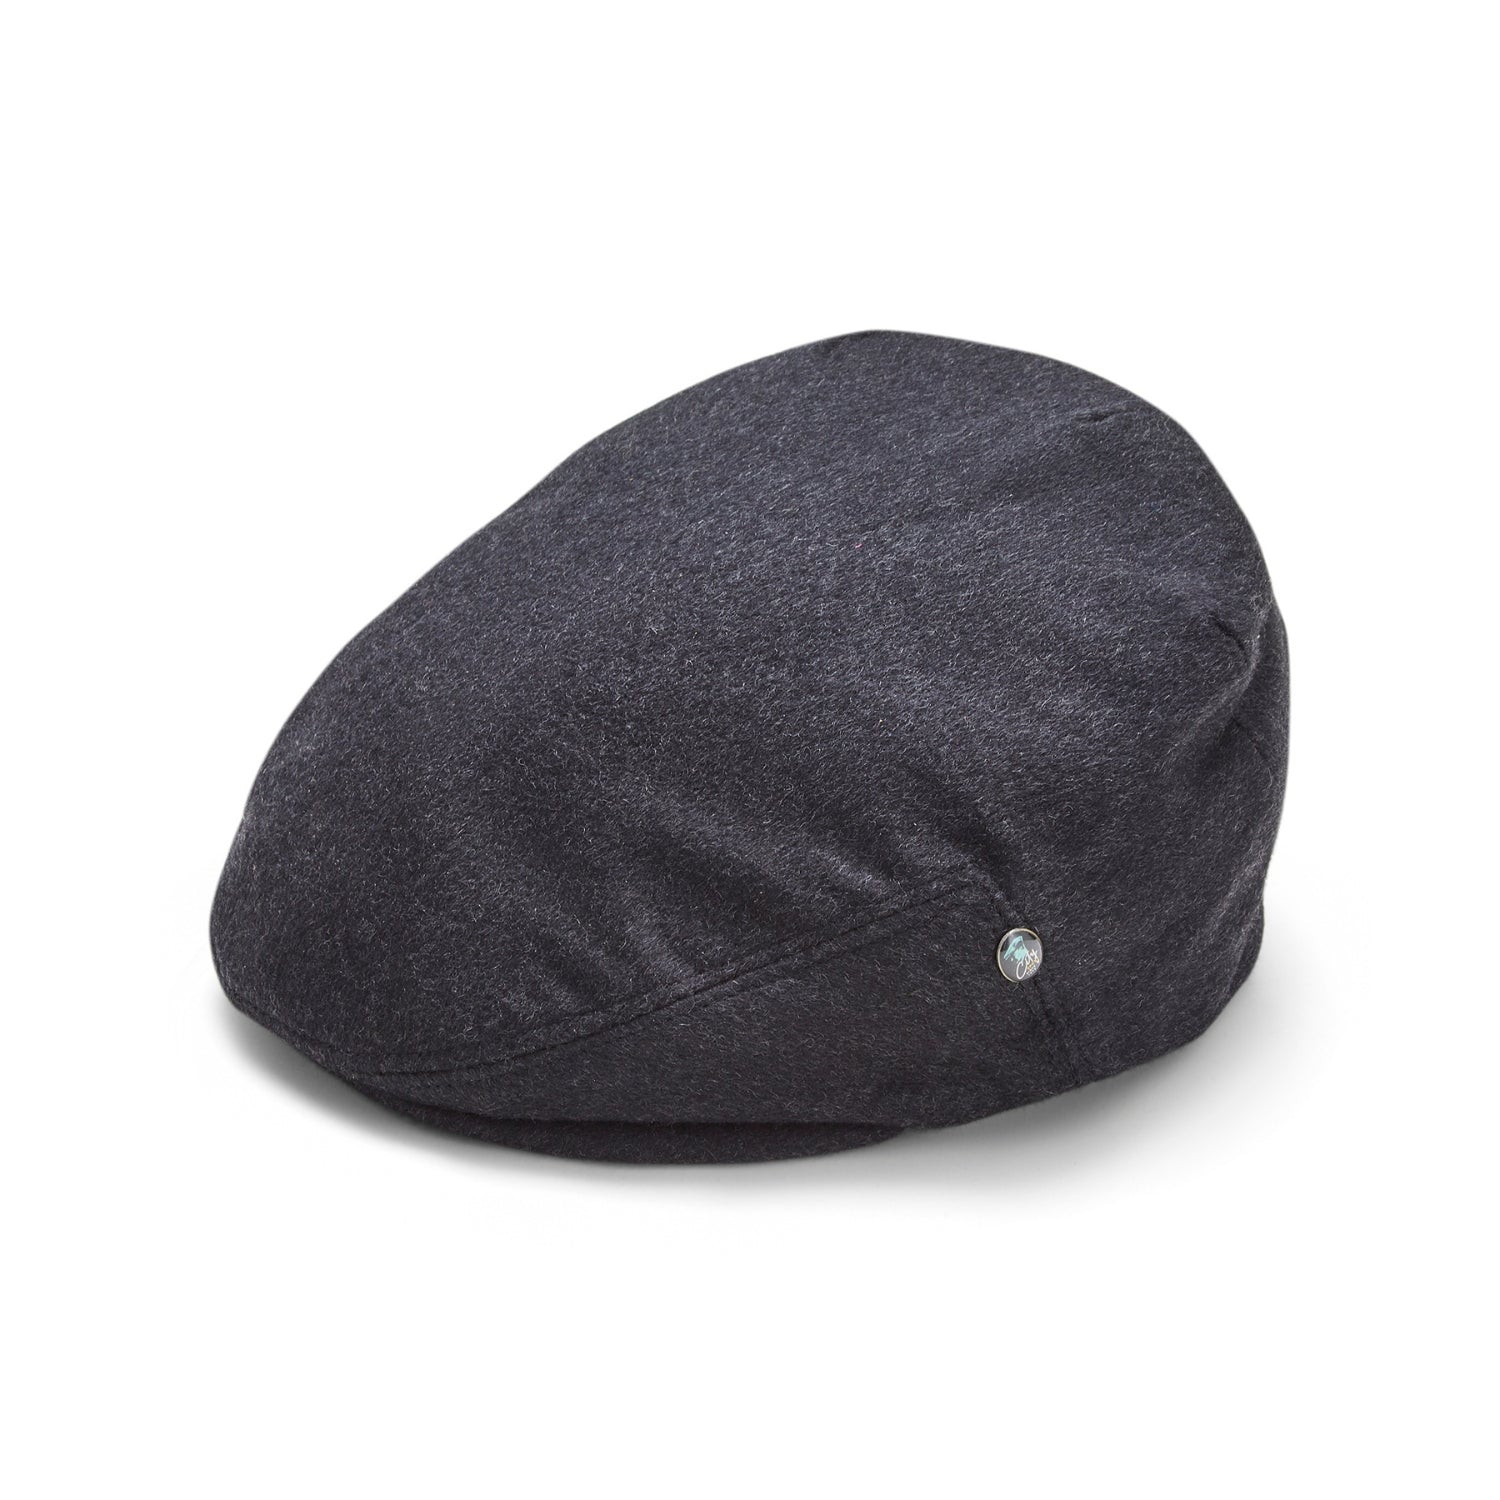 Hats in Peaky Blinders | The Cashmere Choice